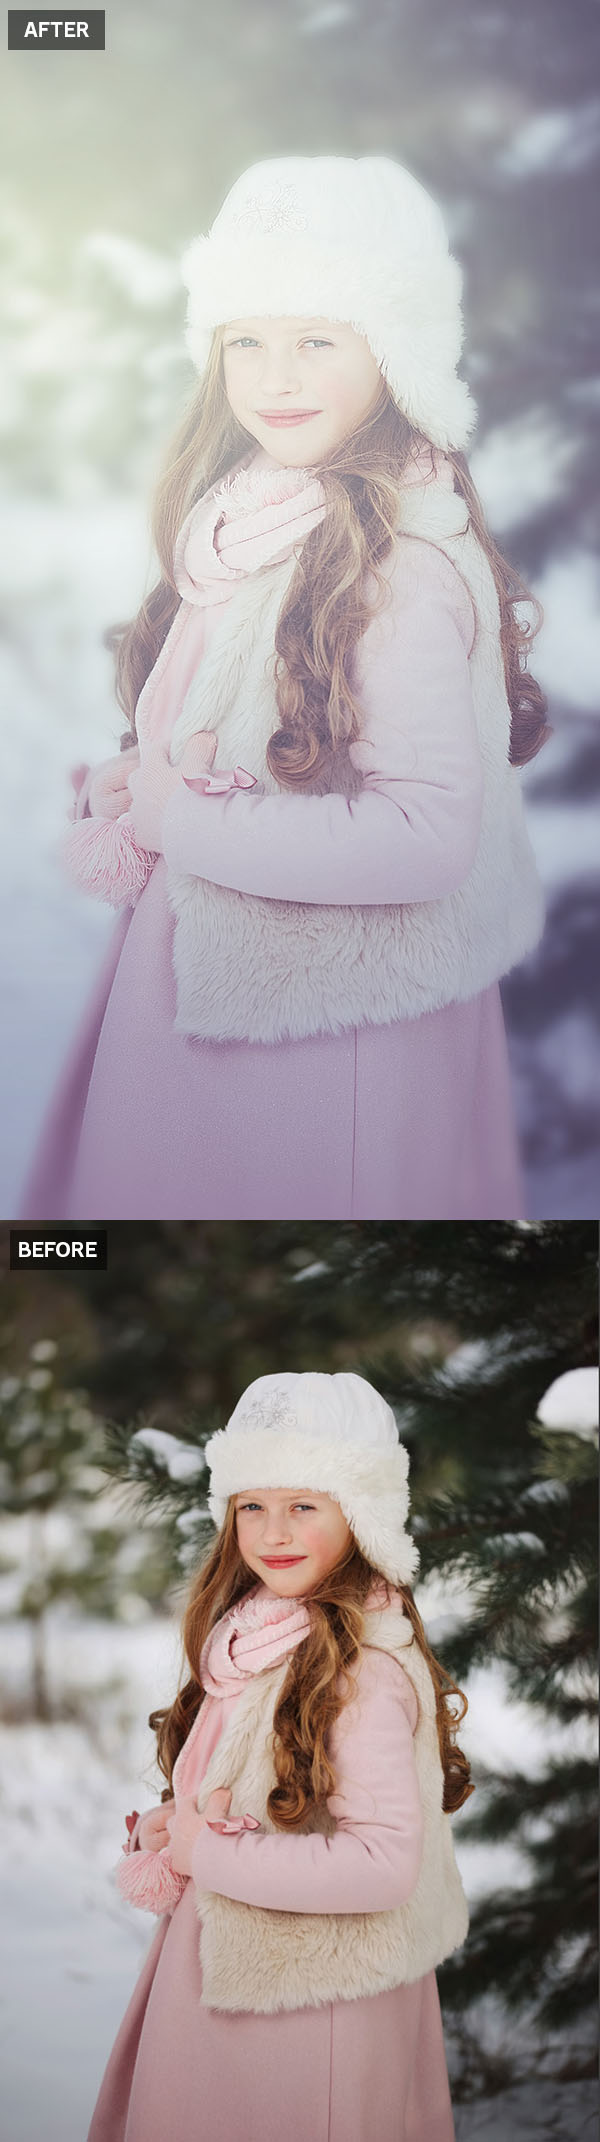 How to Create a Fog Effect Photoshop Action